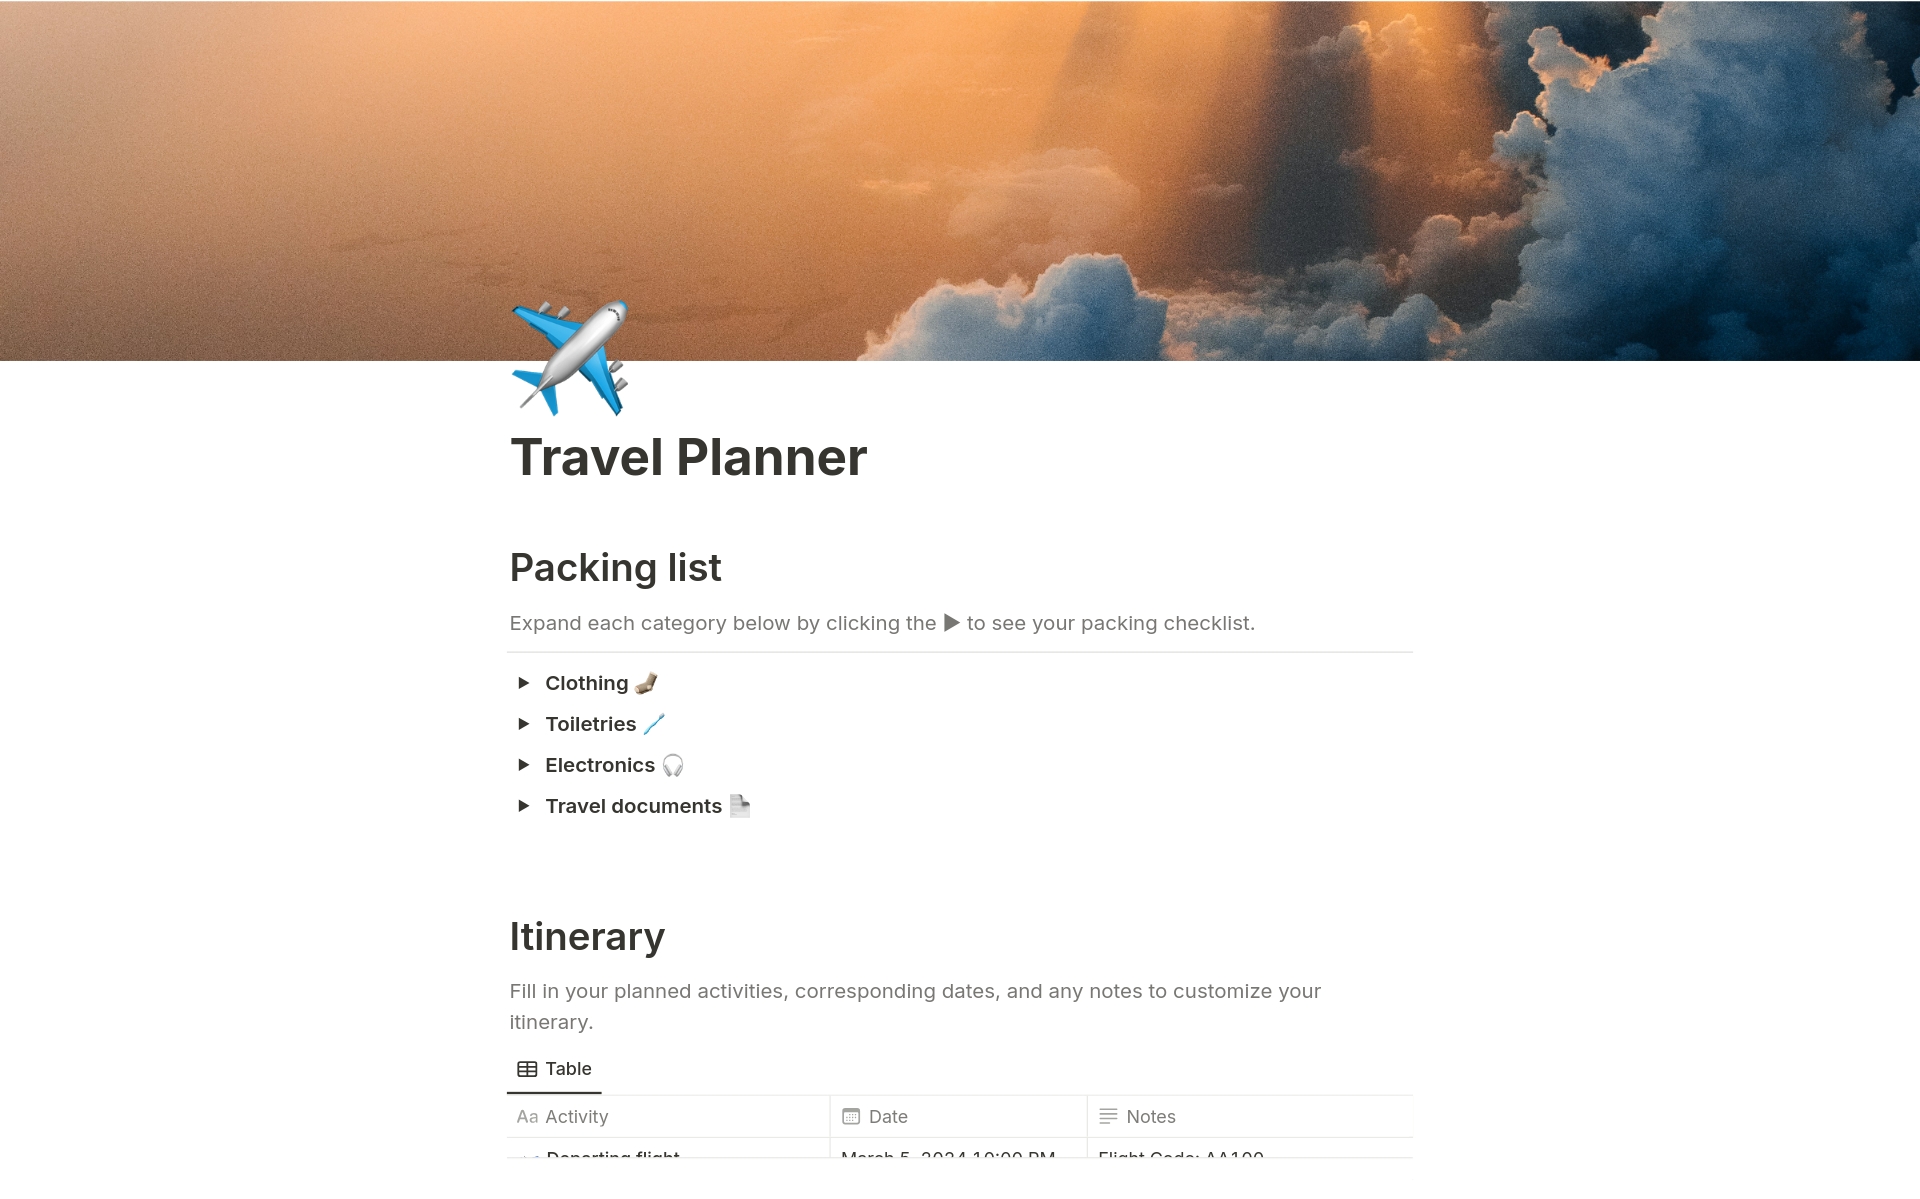 Embark on your next adventure stress-free with our Trip Planner template! This all-in-one organizer combines your packing list and itinerary, turning chaotic travel prep into a seamless experience.